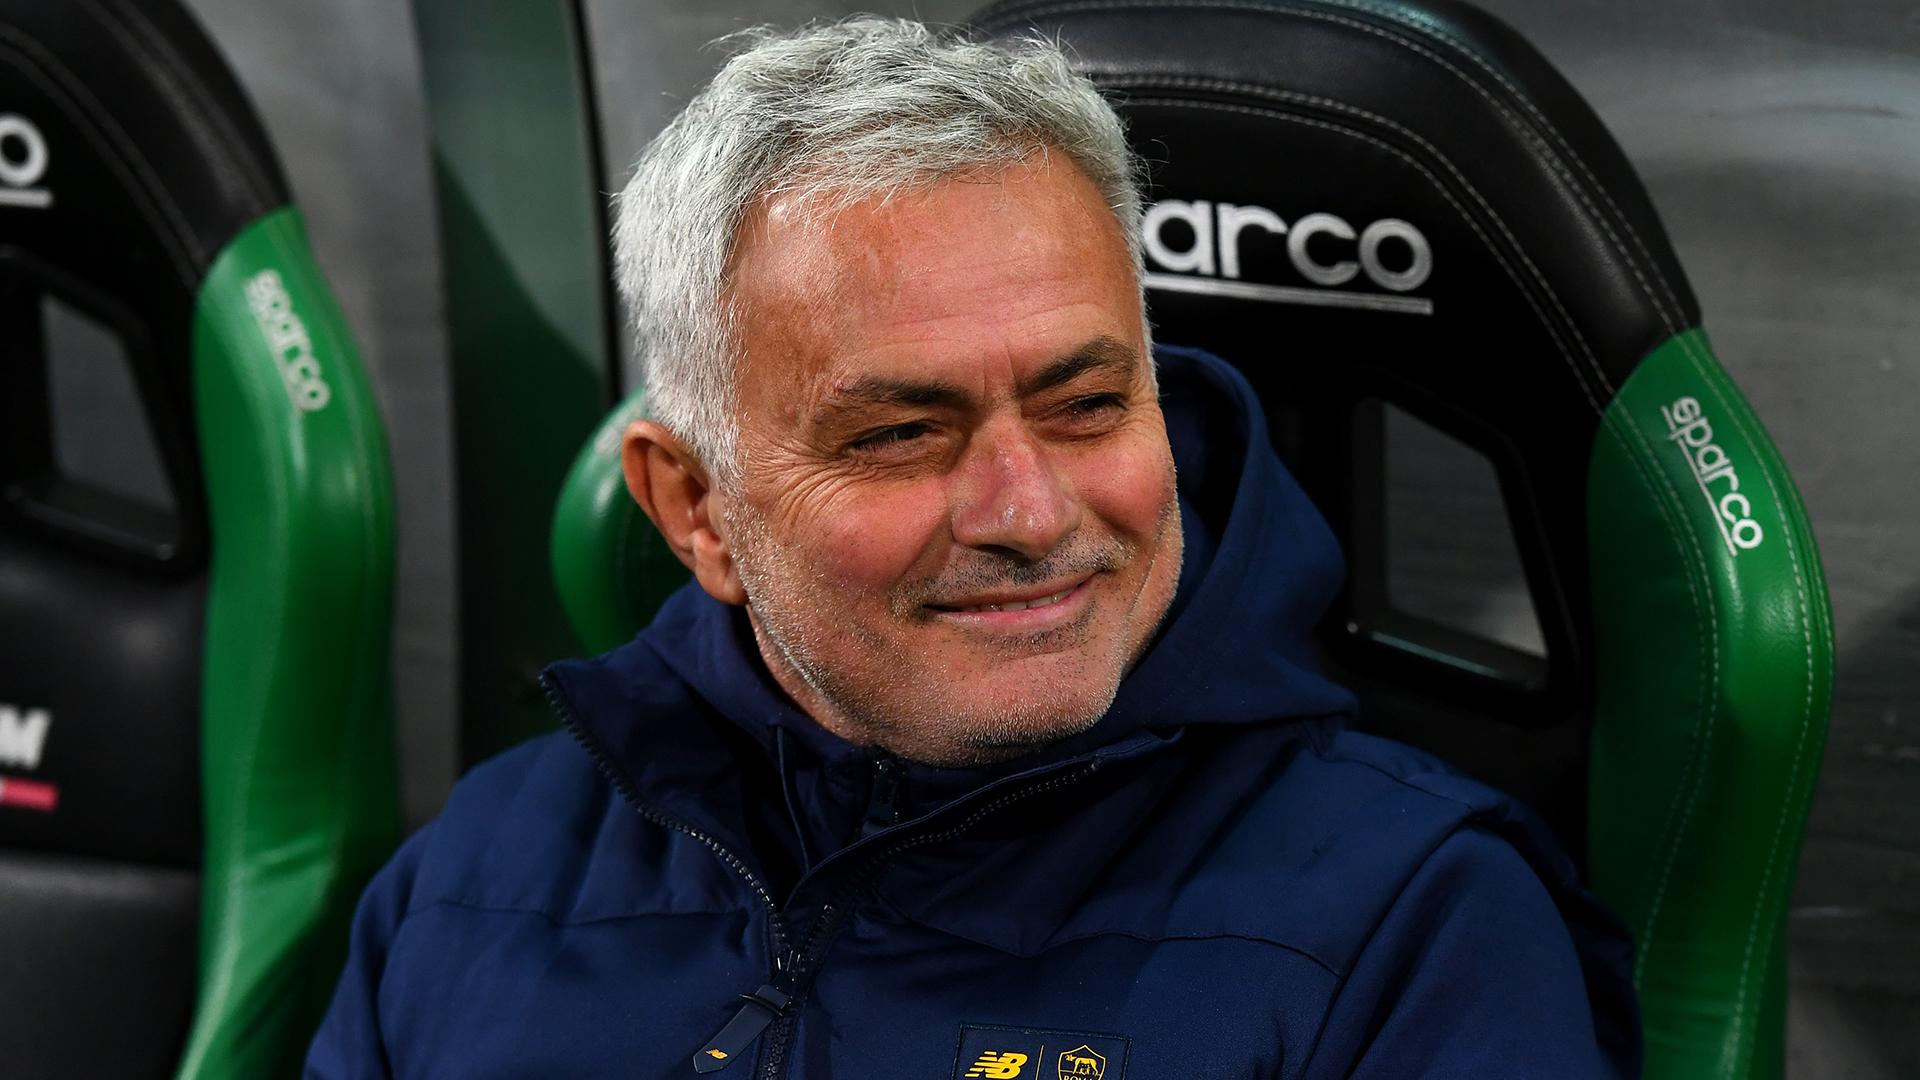 Jose Mourinho, Head Coach of AS Roma looks on prior to the Serie A match between US Sassuolo and AS Roma at Mapei Stadium - Citta' del Tricolore on November 09, 2022 in Reggio nell'Emilia, Italy.